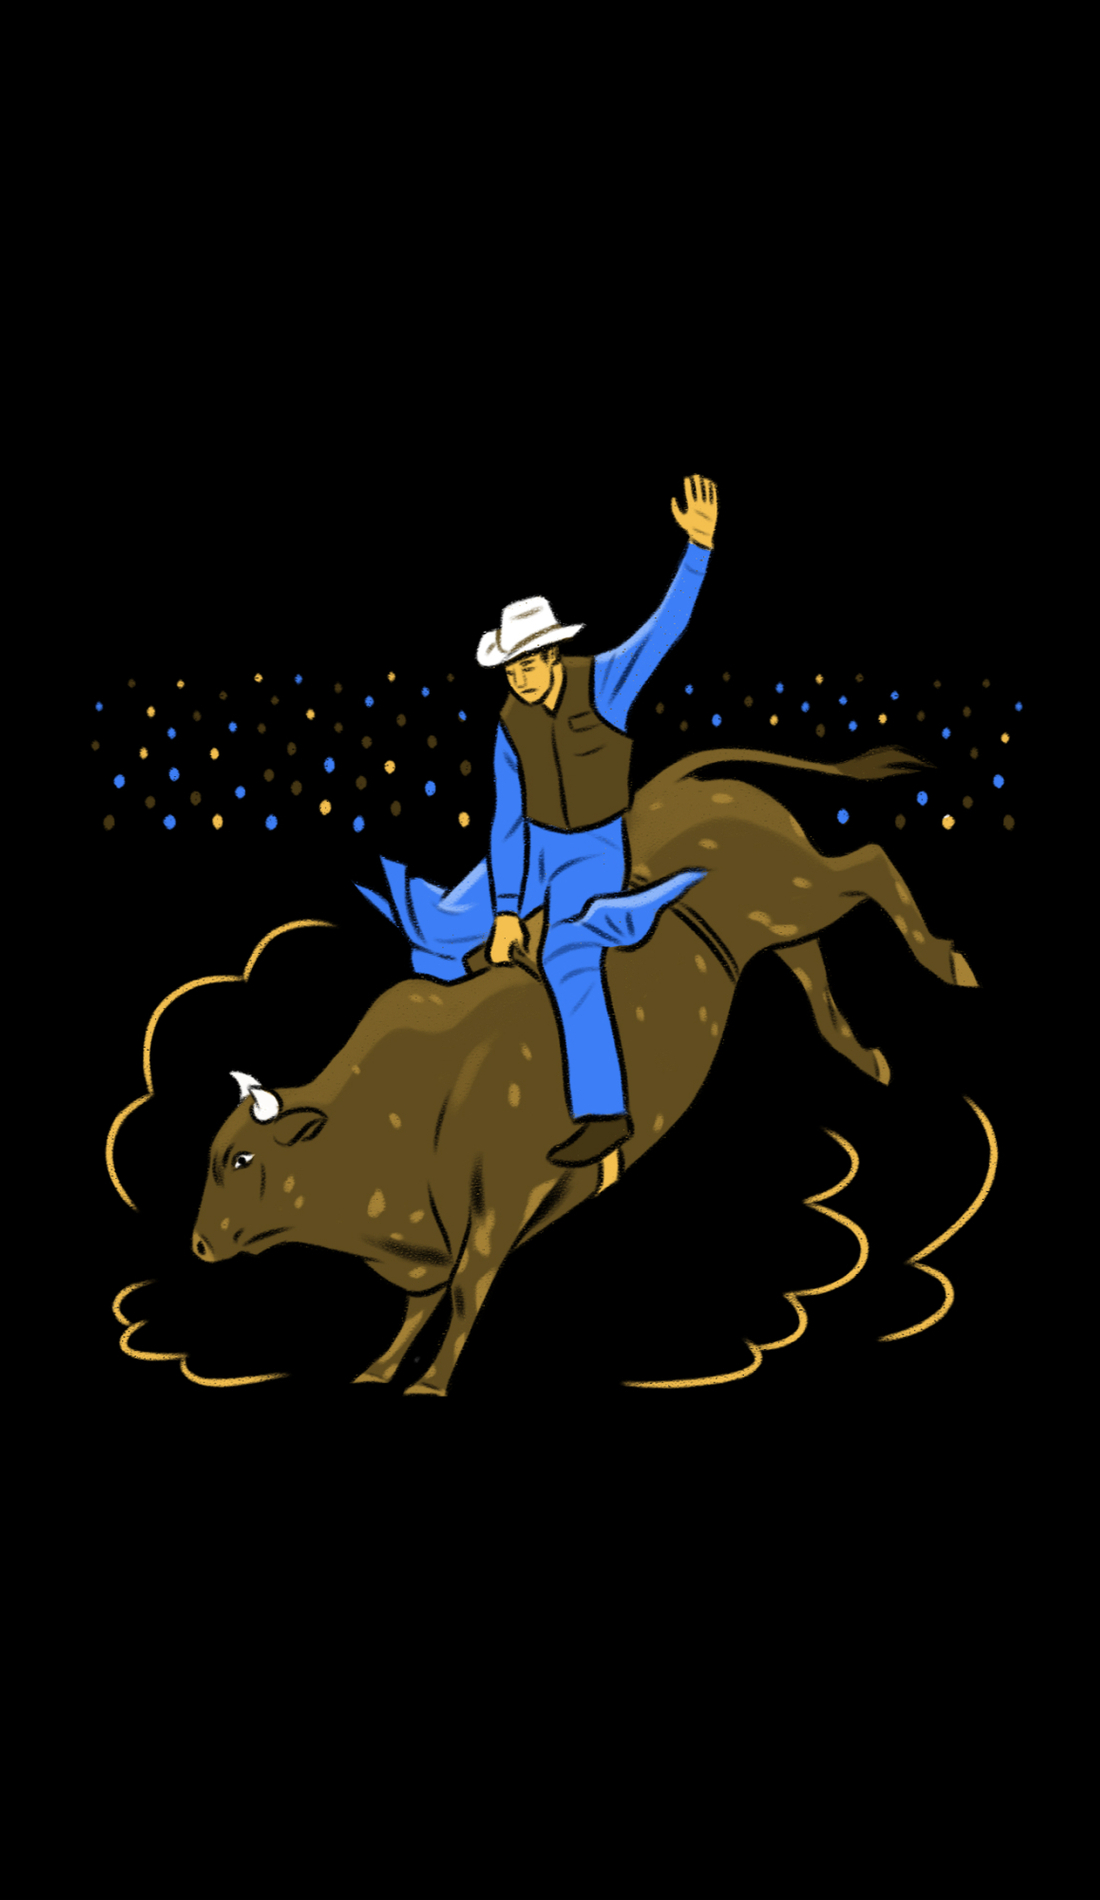 A WCRA Rodeo live event